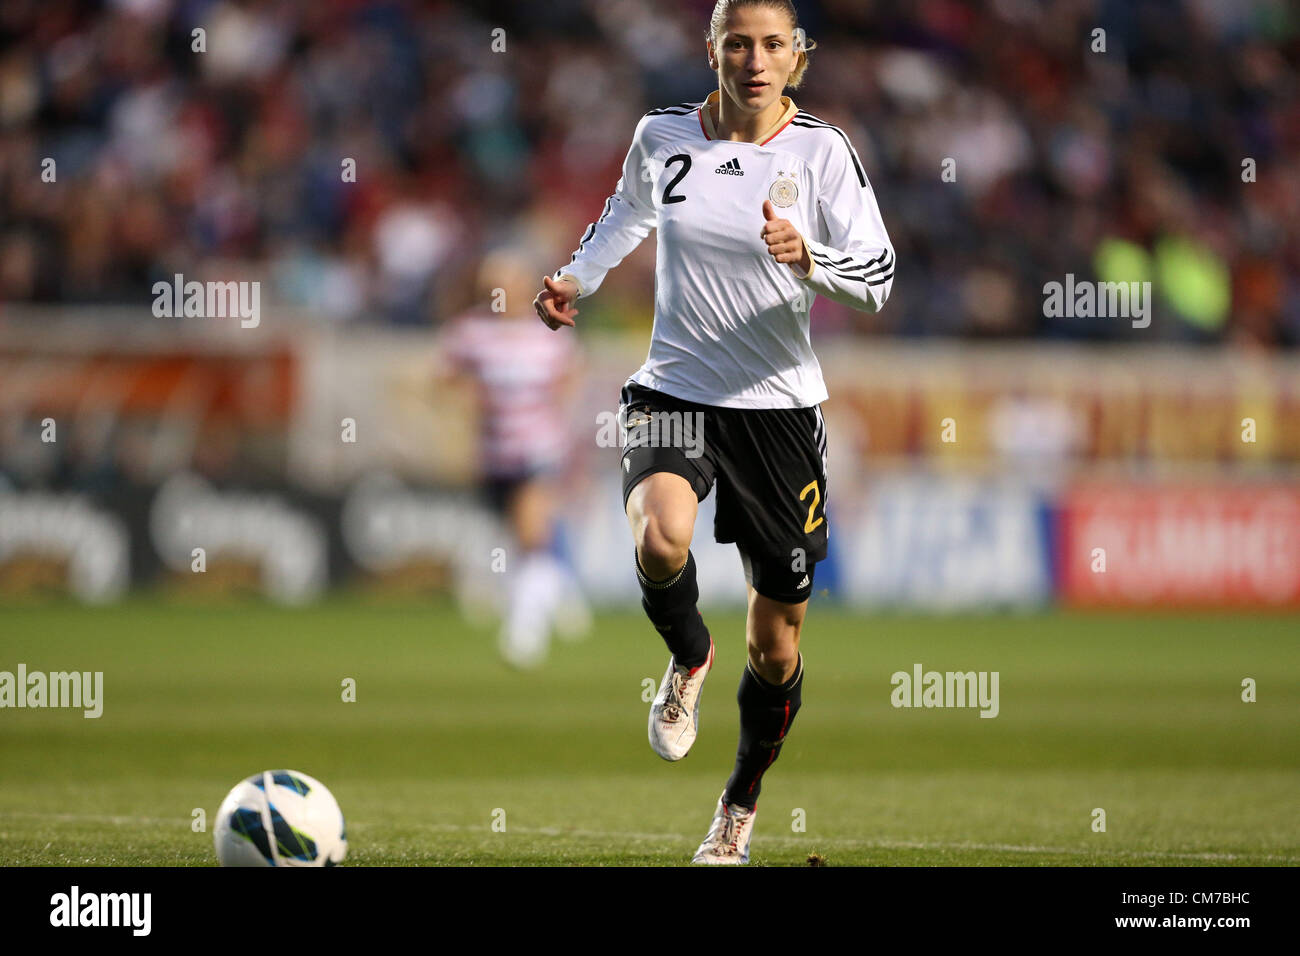 20.10.2012. Chicago, USA.  Bianca Schmidt (GER). The United States Women's National Team played the Germany Women's National Team at Toyota Park in Bridgeview, Illinois in a women's international friendly soccer match. The game ended in a 1-1 tie. Stock Photo